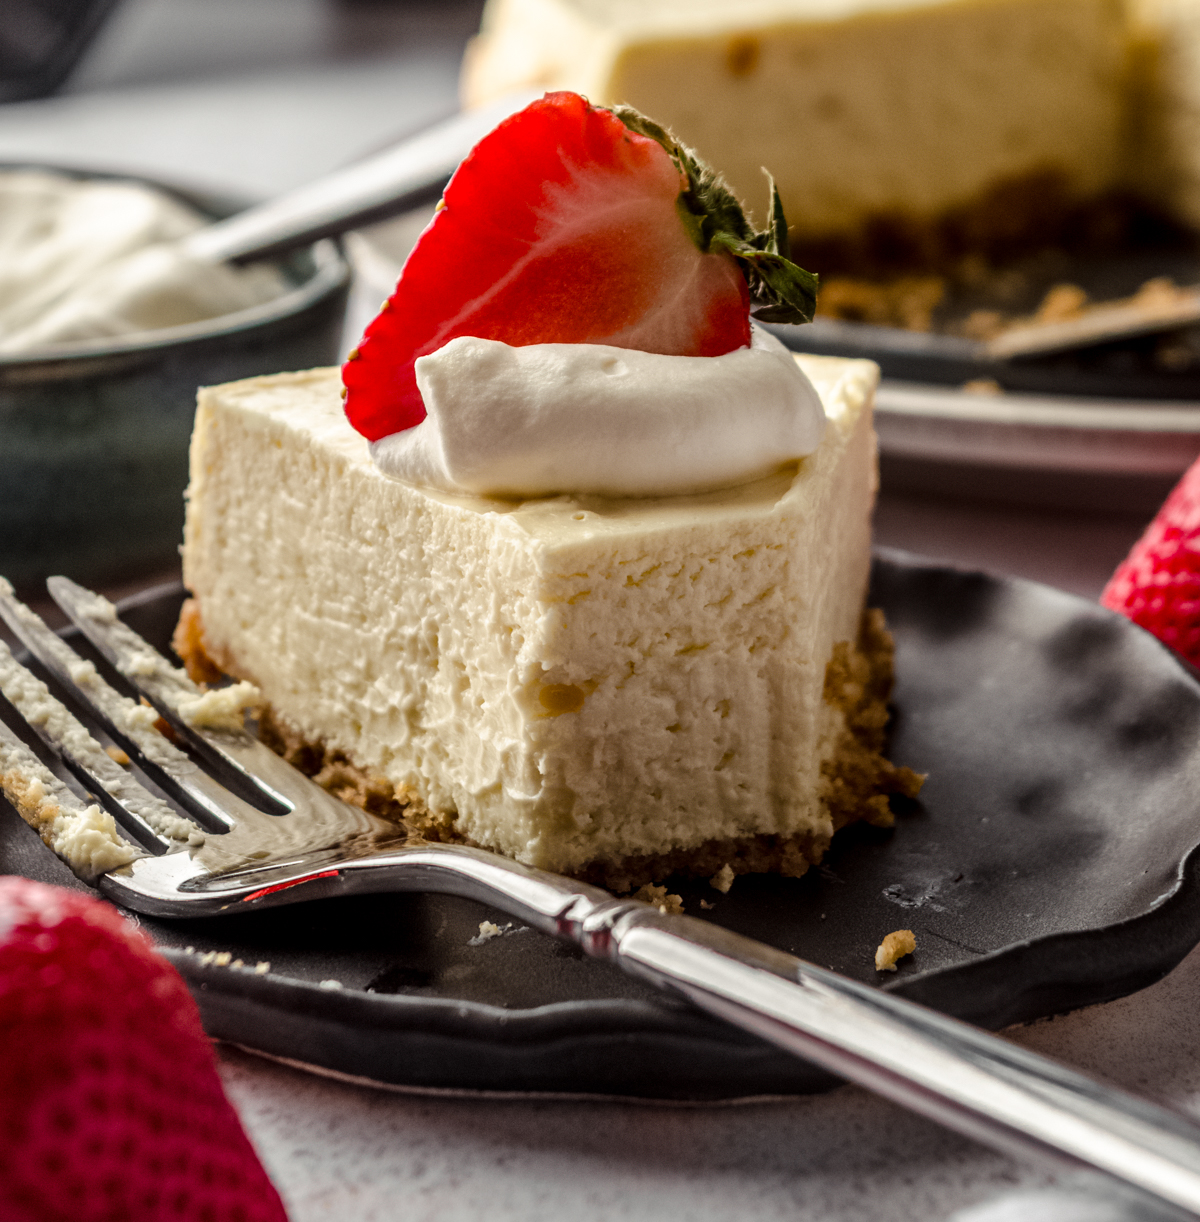 A slice of Instant Pot cheesecake on a plate with a fork. There is a dollop of whipped cream and a strawberry on top. A bite has been taken out of it.